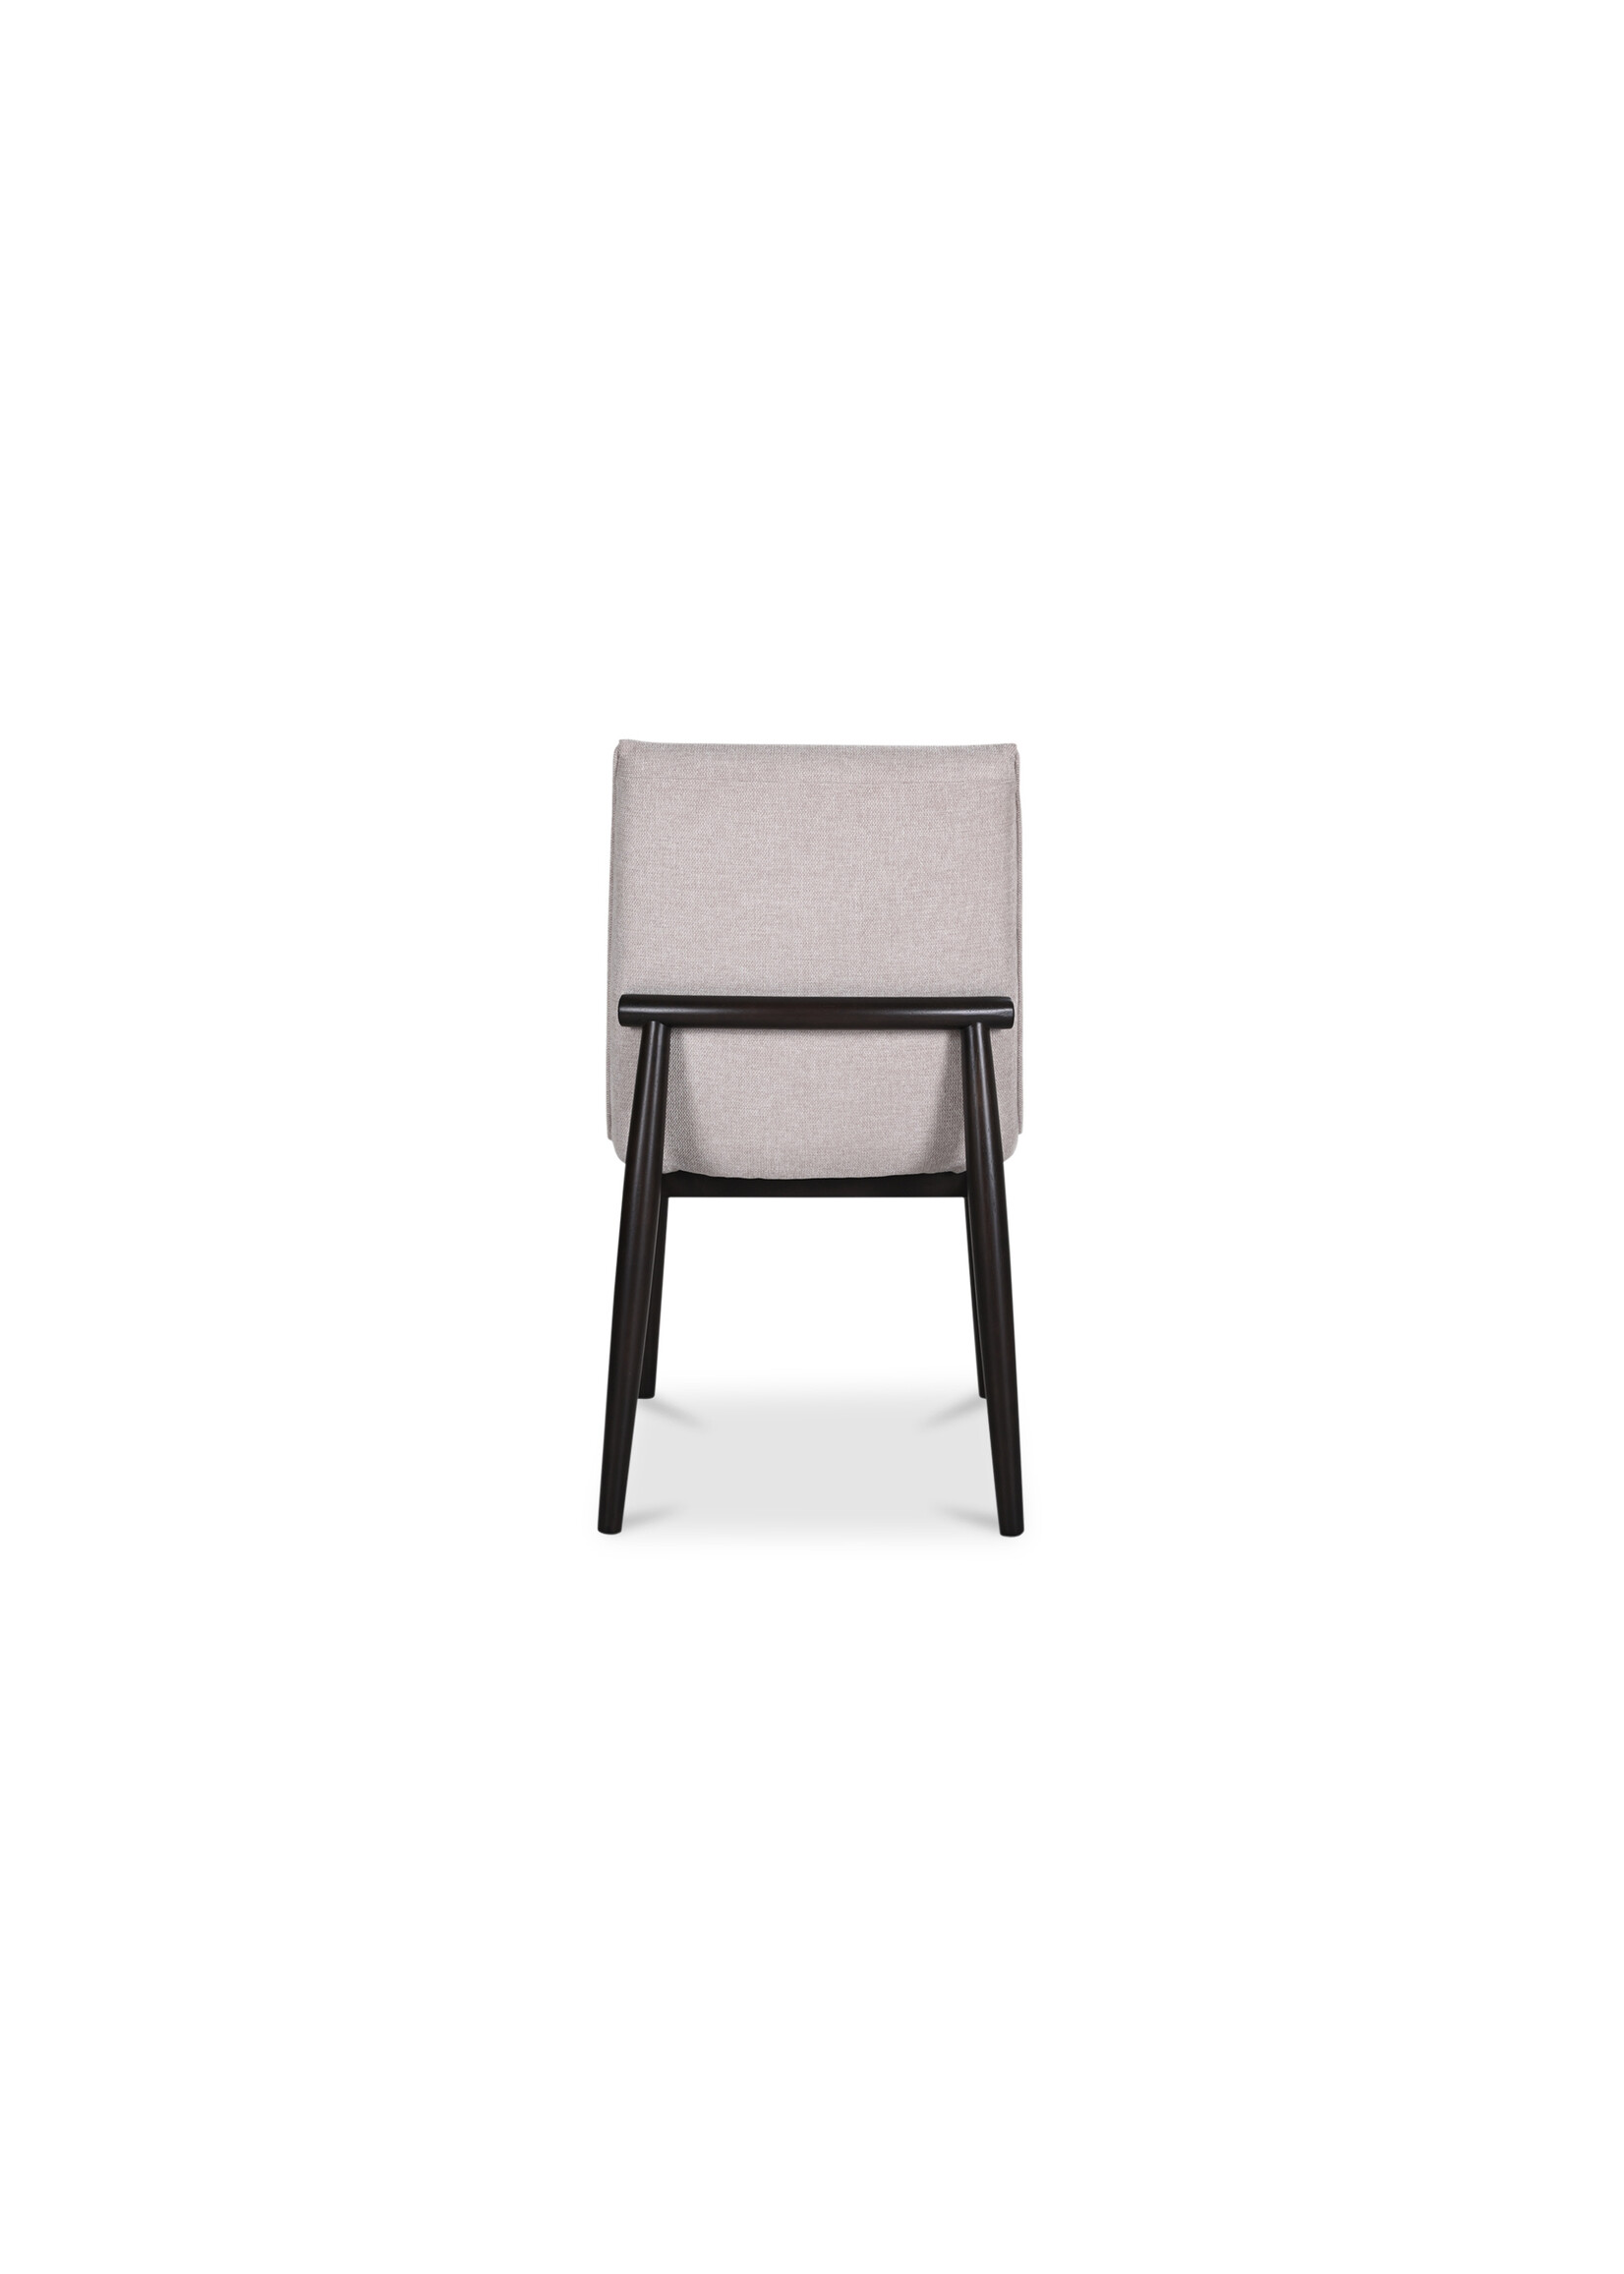 Charlie Dining Chair - Beige